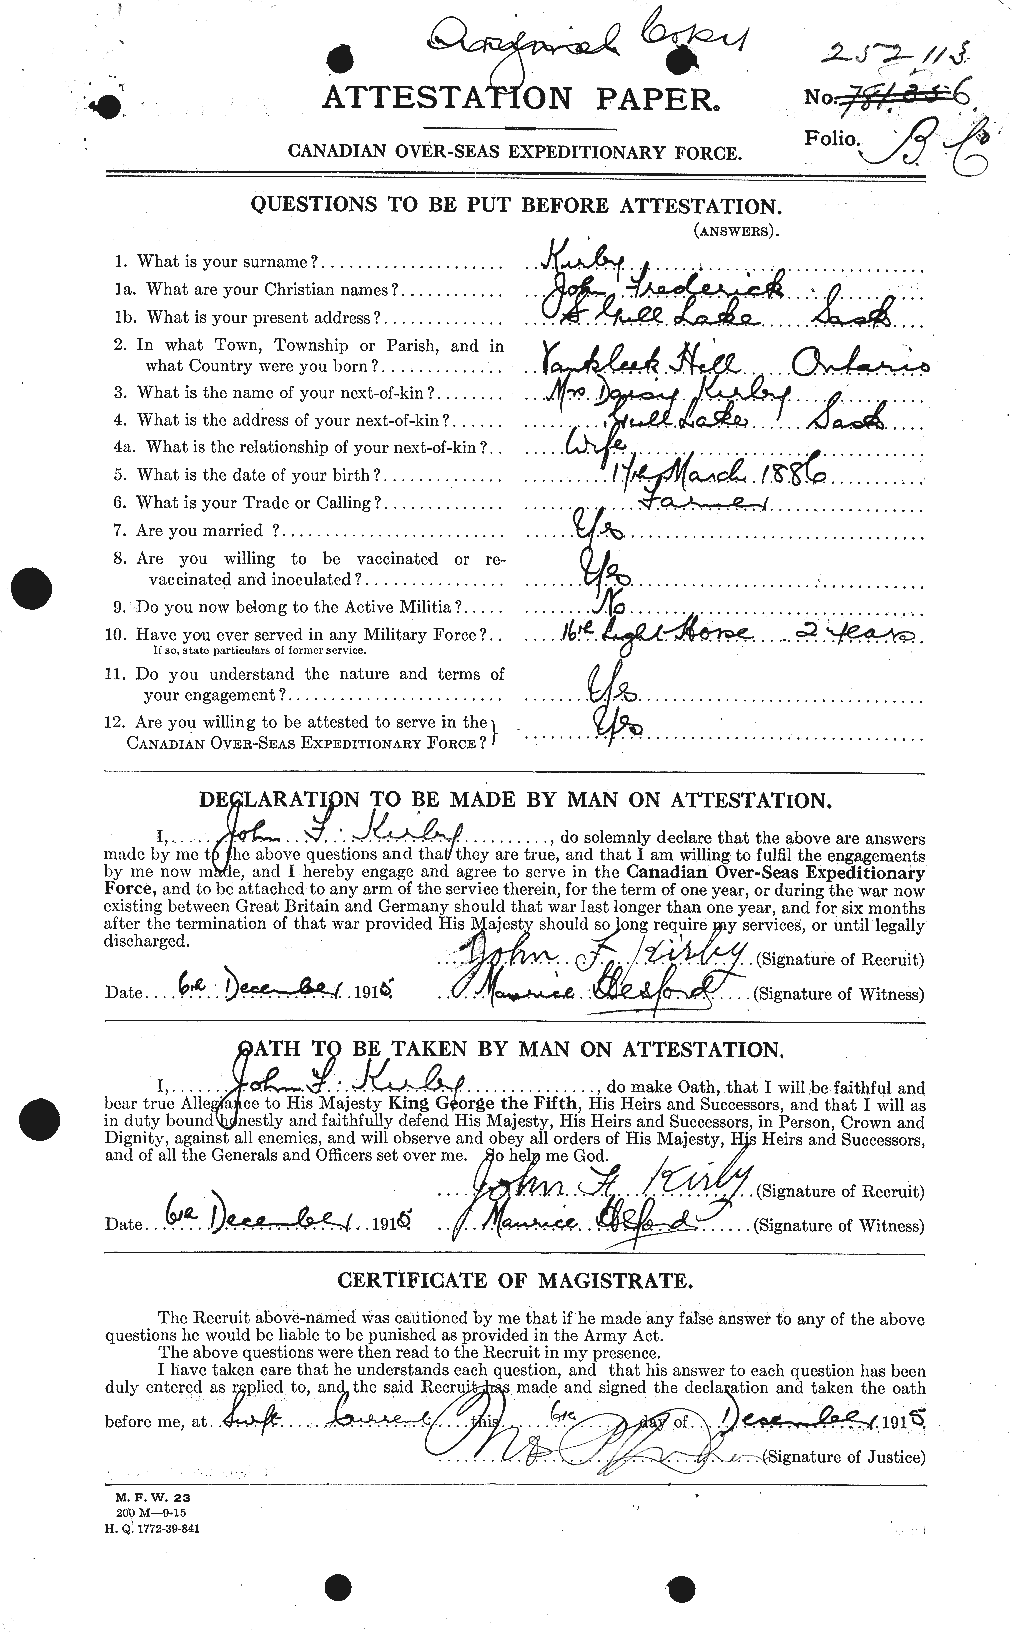 Personnel Records of the First World War - CEF 437230a